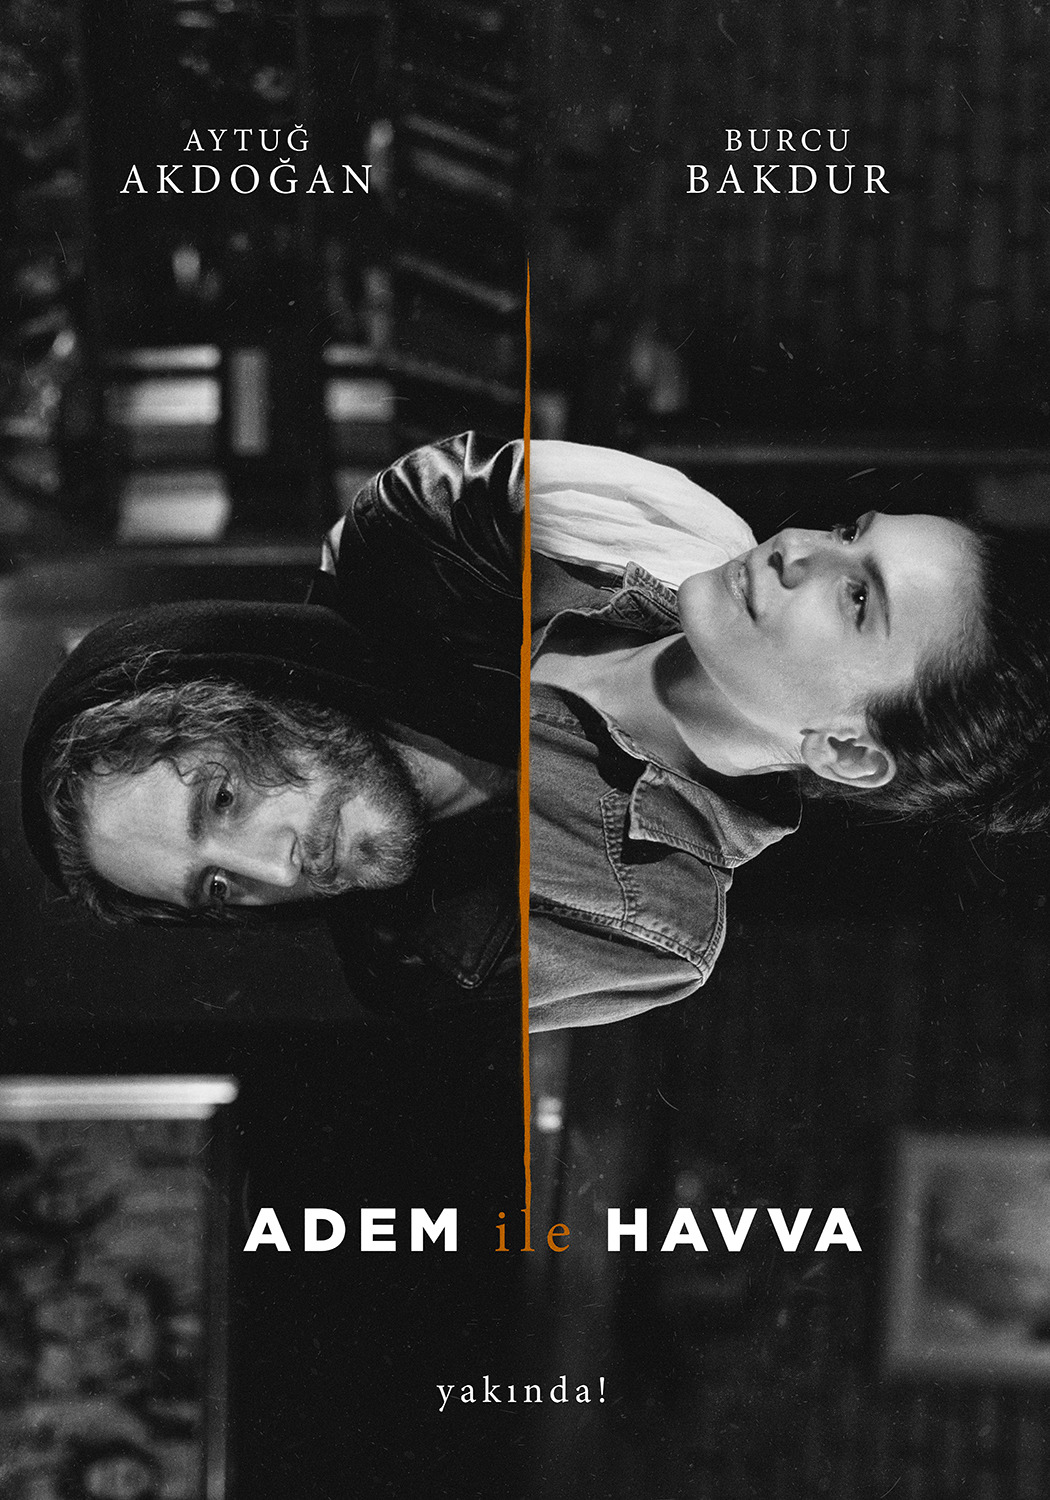 Extra Large TV Poster Image for Adem ile Havva 